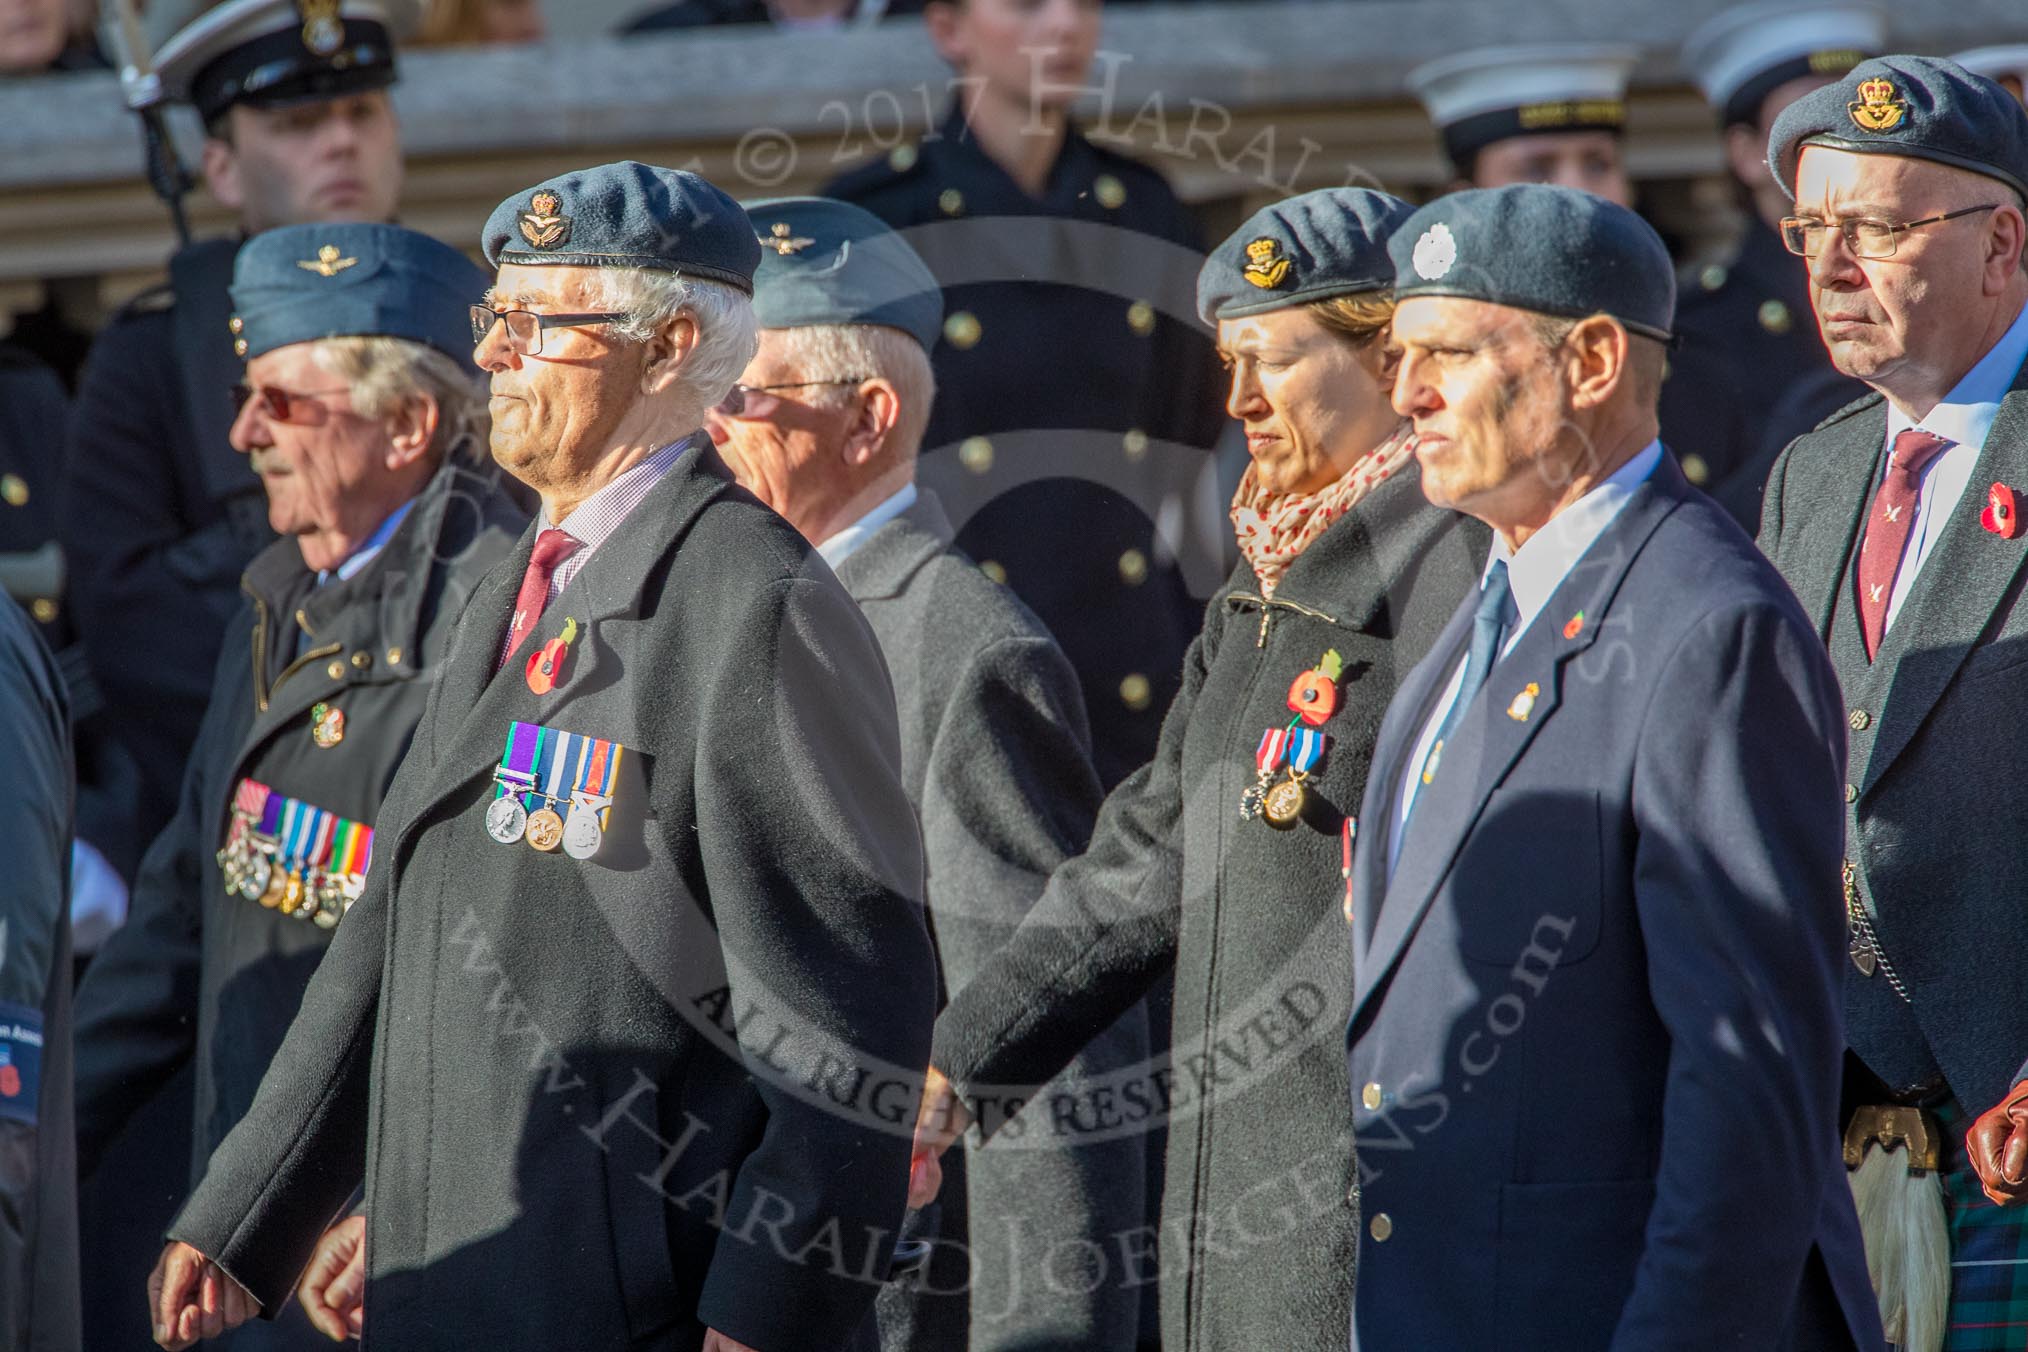 202 Squadron Association (Group C28, 16 members) during the Royal British Legion March Past on Remembrance Sunday at the Cenotaph, Whitehall, Westminster, London, 11 November 2018, 12:19.